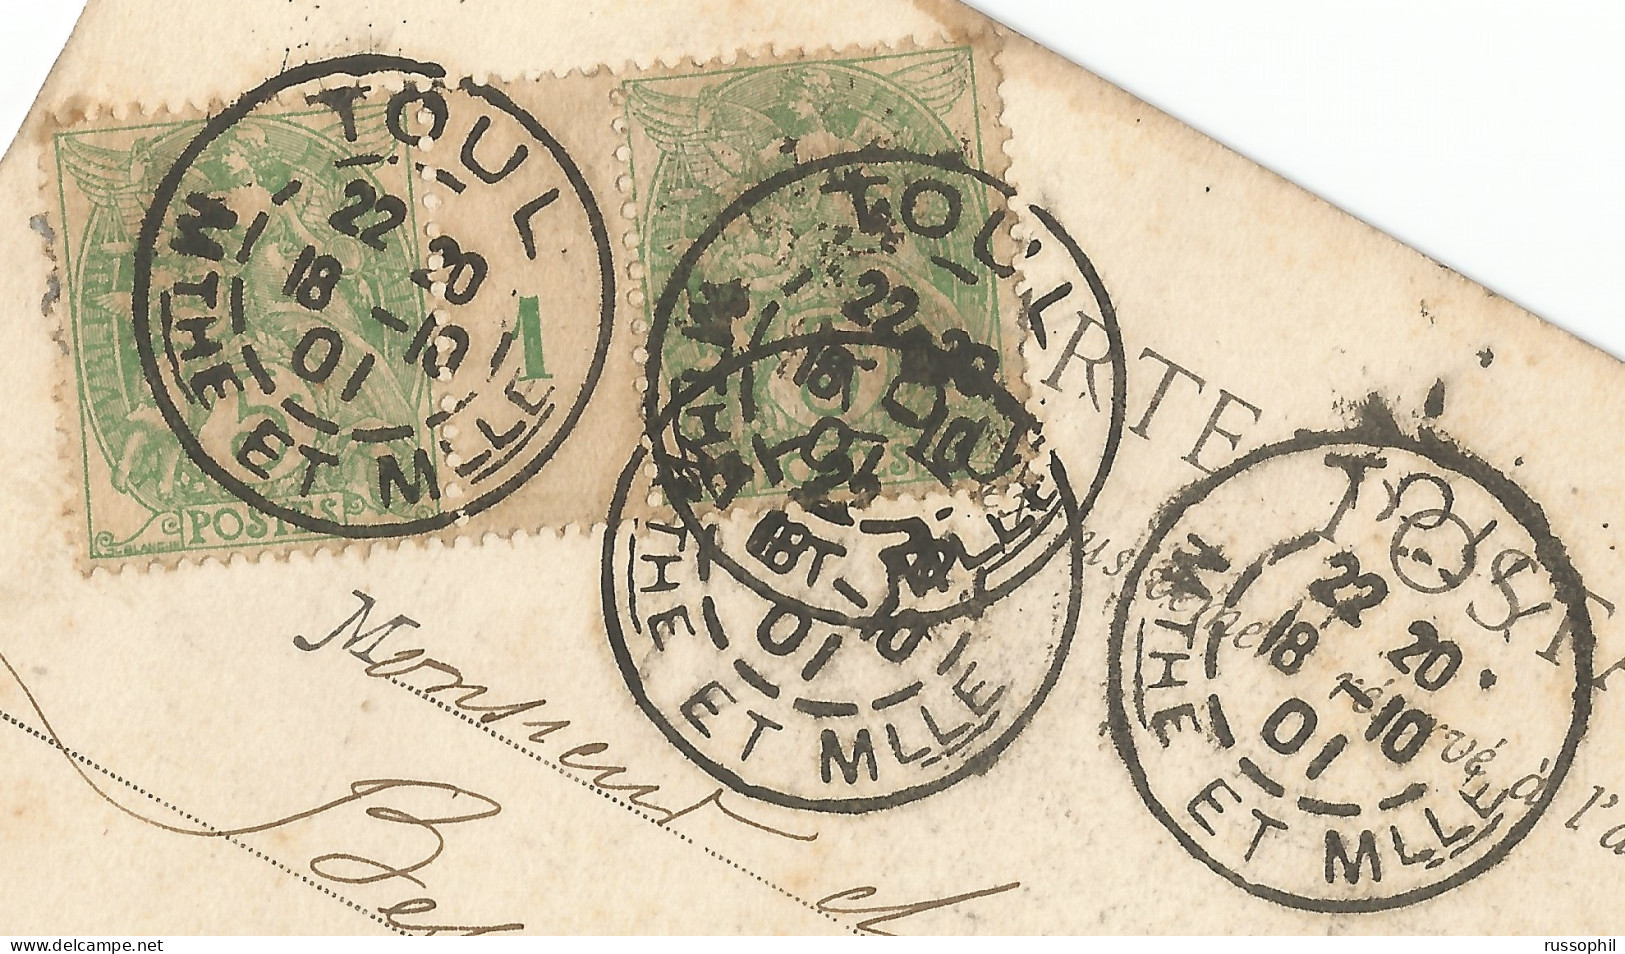 FRANCE - MILLESIMES - PAIRED DAGUIN A3 CDSs "TOUL" ON FRANKED PC (PAIR Yv. 111 MILLESIME 01) TO PARIS - 1901 - Millésime